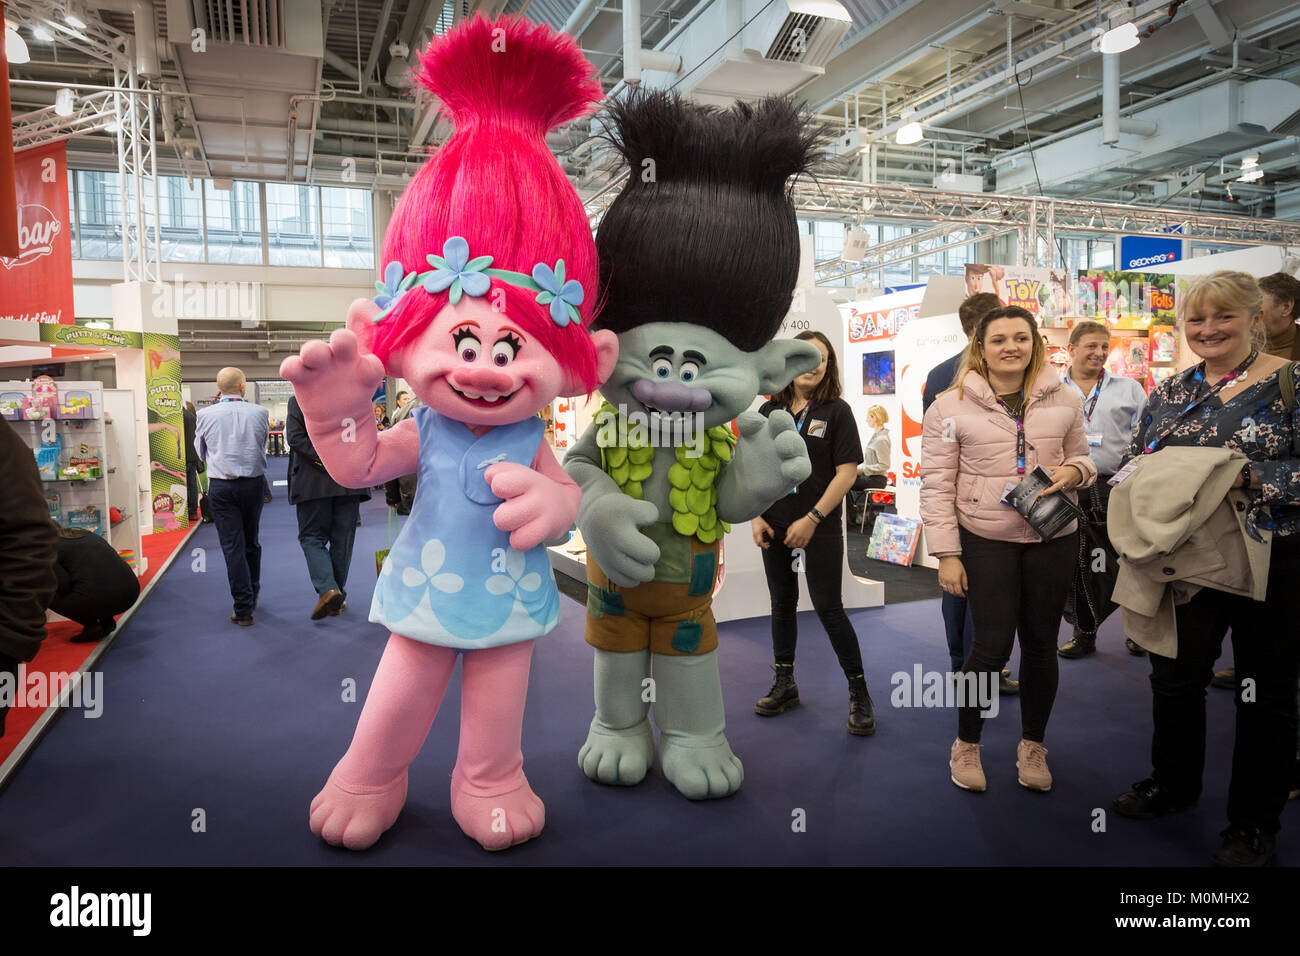 London, UK. 23rd Jan, 2018. Poppy and Branch from Trolls posing for the photograph at the Toy Fair 2018. Credit: Laura De Meo/ Alamy Live News Stock Photo